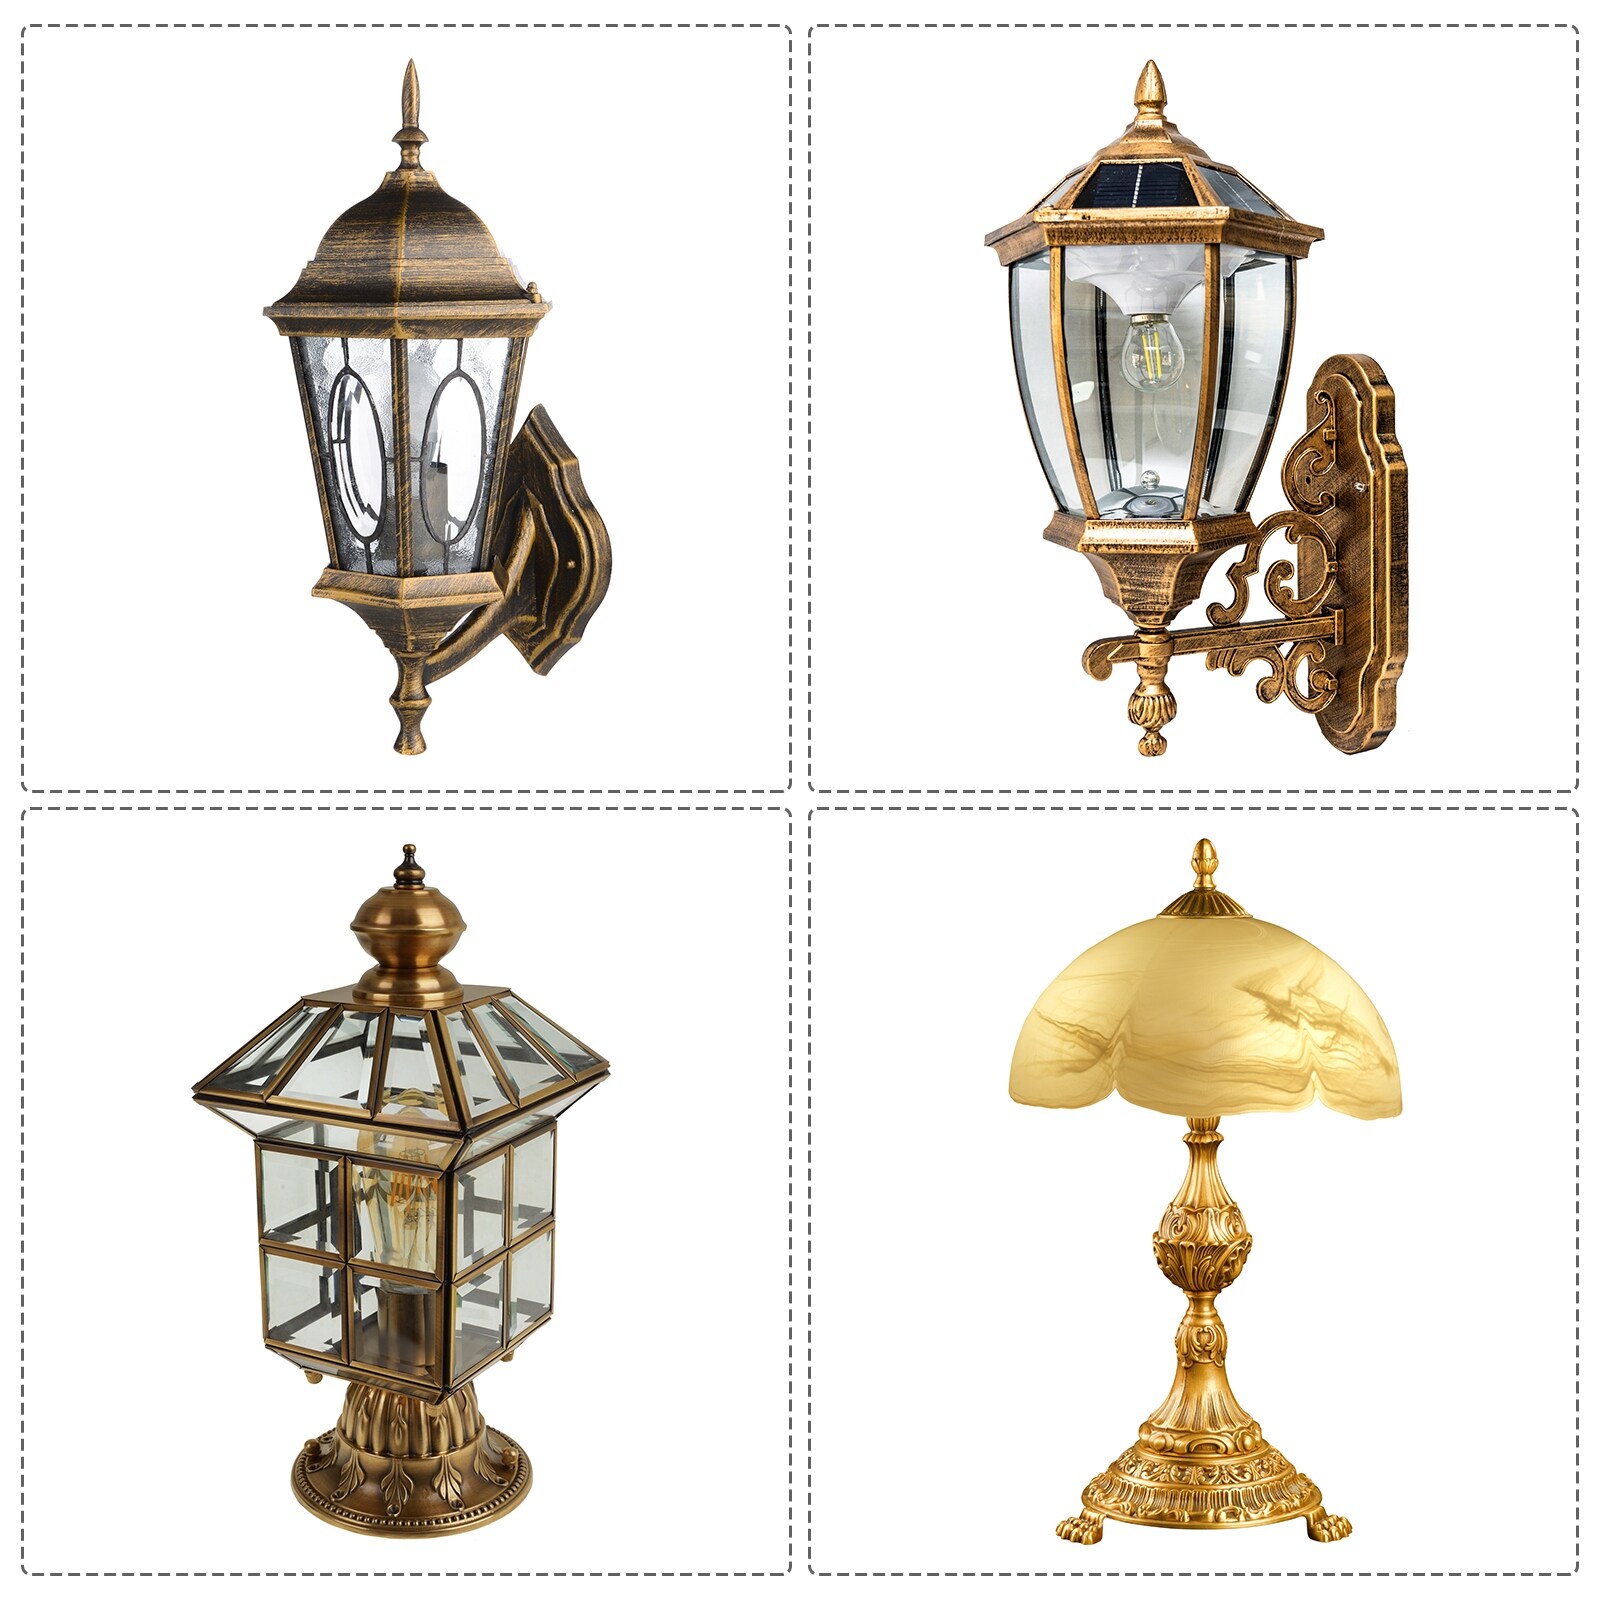 https://ak1.ostkcdn.com/images/products/is/images/direct/5a3e258614c477b8277e57f87f6ff90cbca60dda/M10-Thread-Lamp-Finial-Cap-Knob-Brass-Lamp-Shade-Harp-Top-Screw-24.5x52mm.jpg